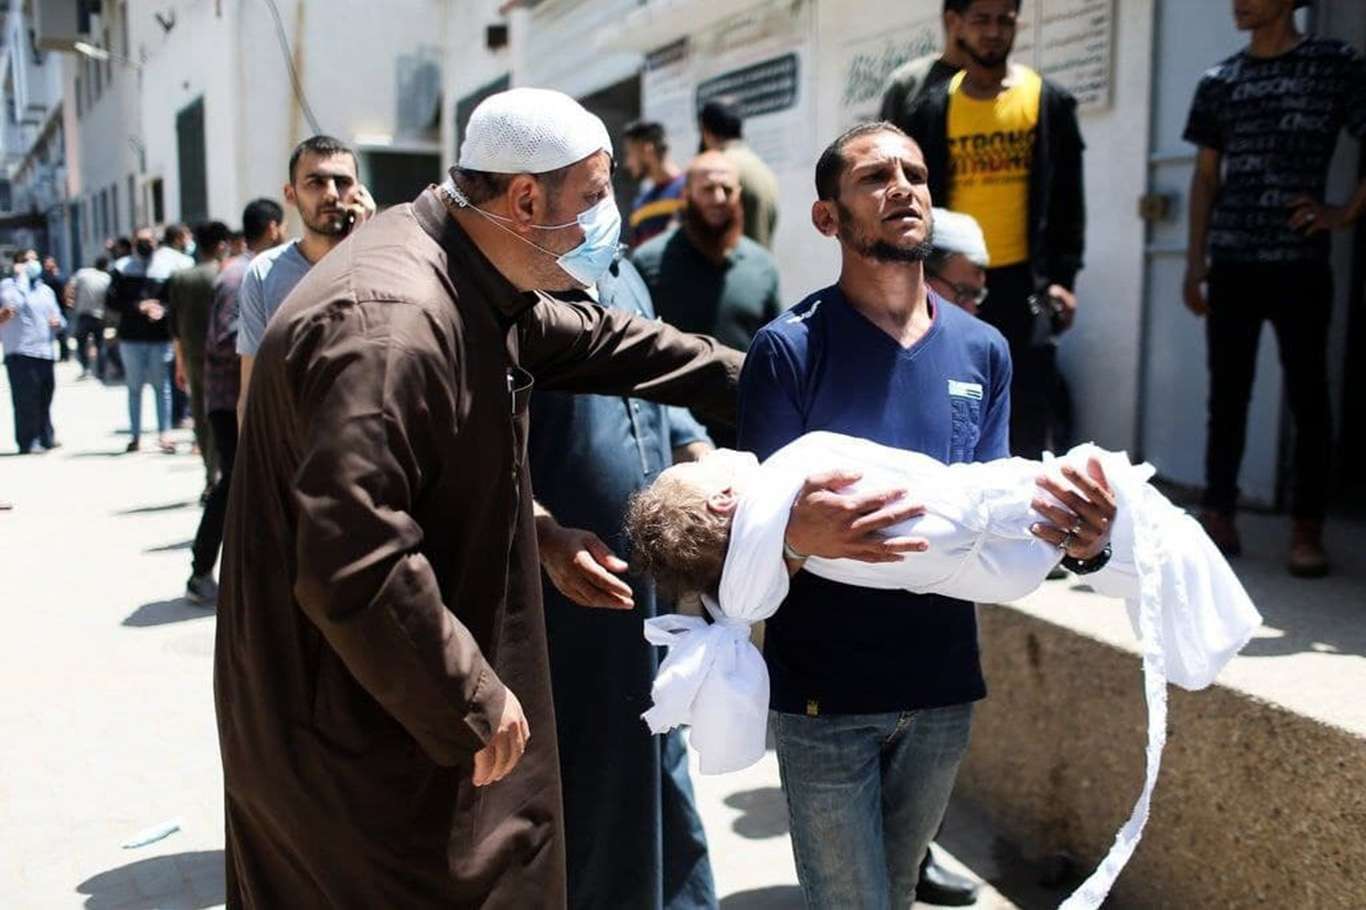 Death toll from zionist aggression on Palestinians climbs to 231, including 64 children